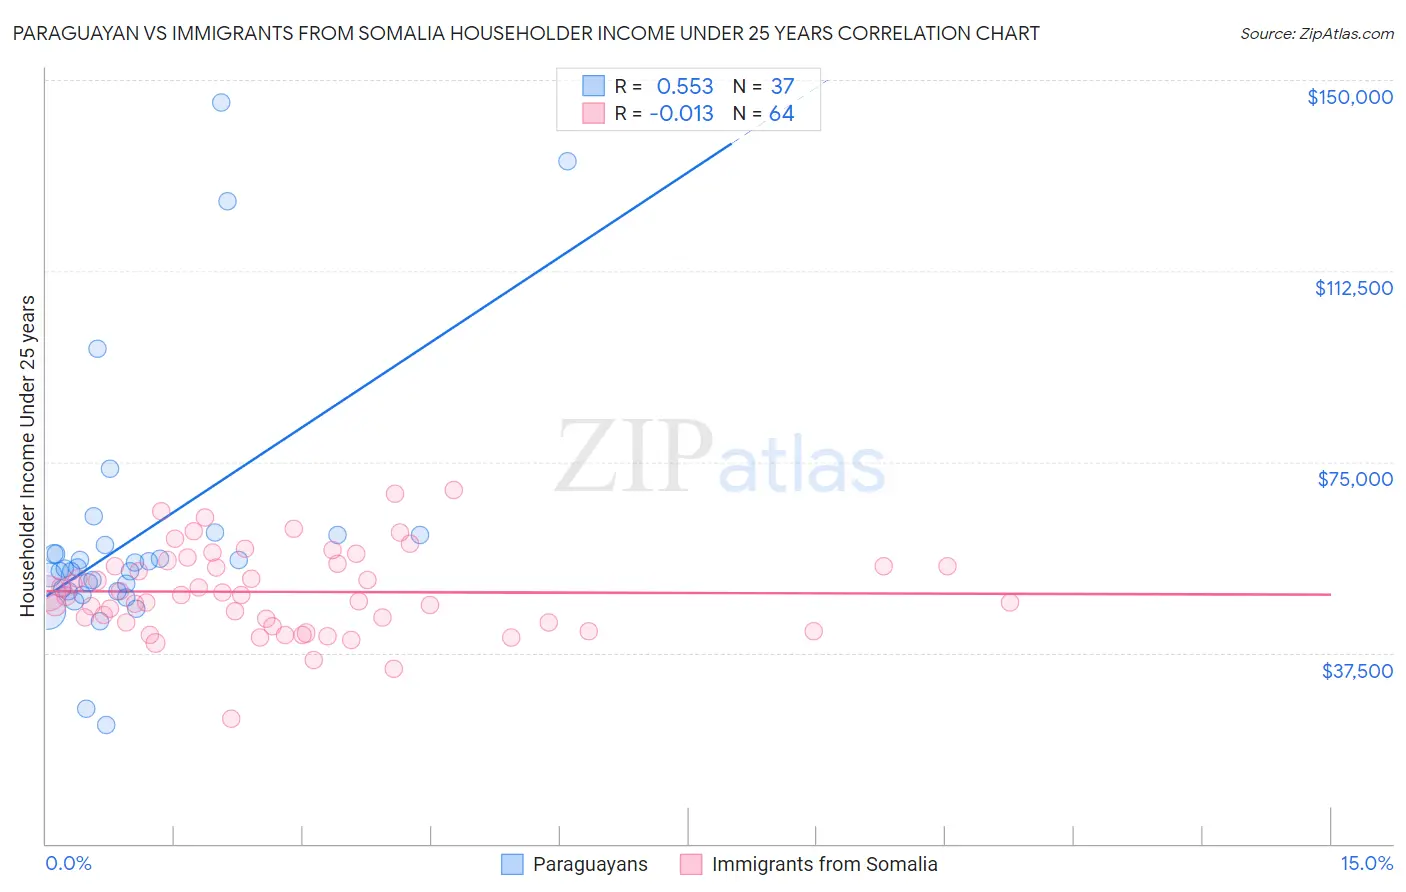 Paraguayan vs Immigrants from Somalia Householder Income Under 25 years